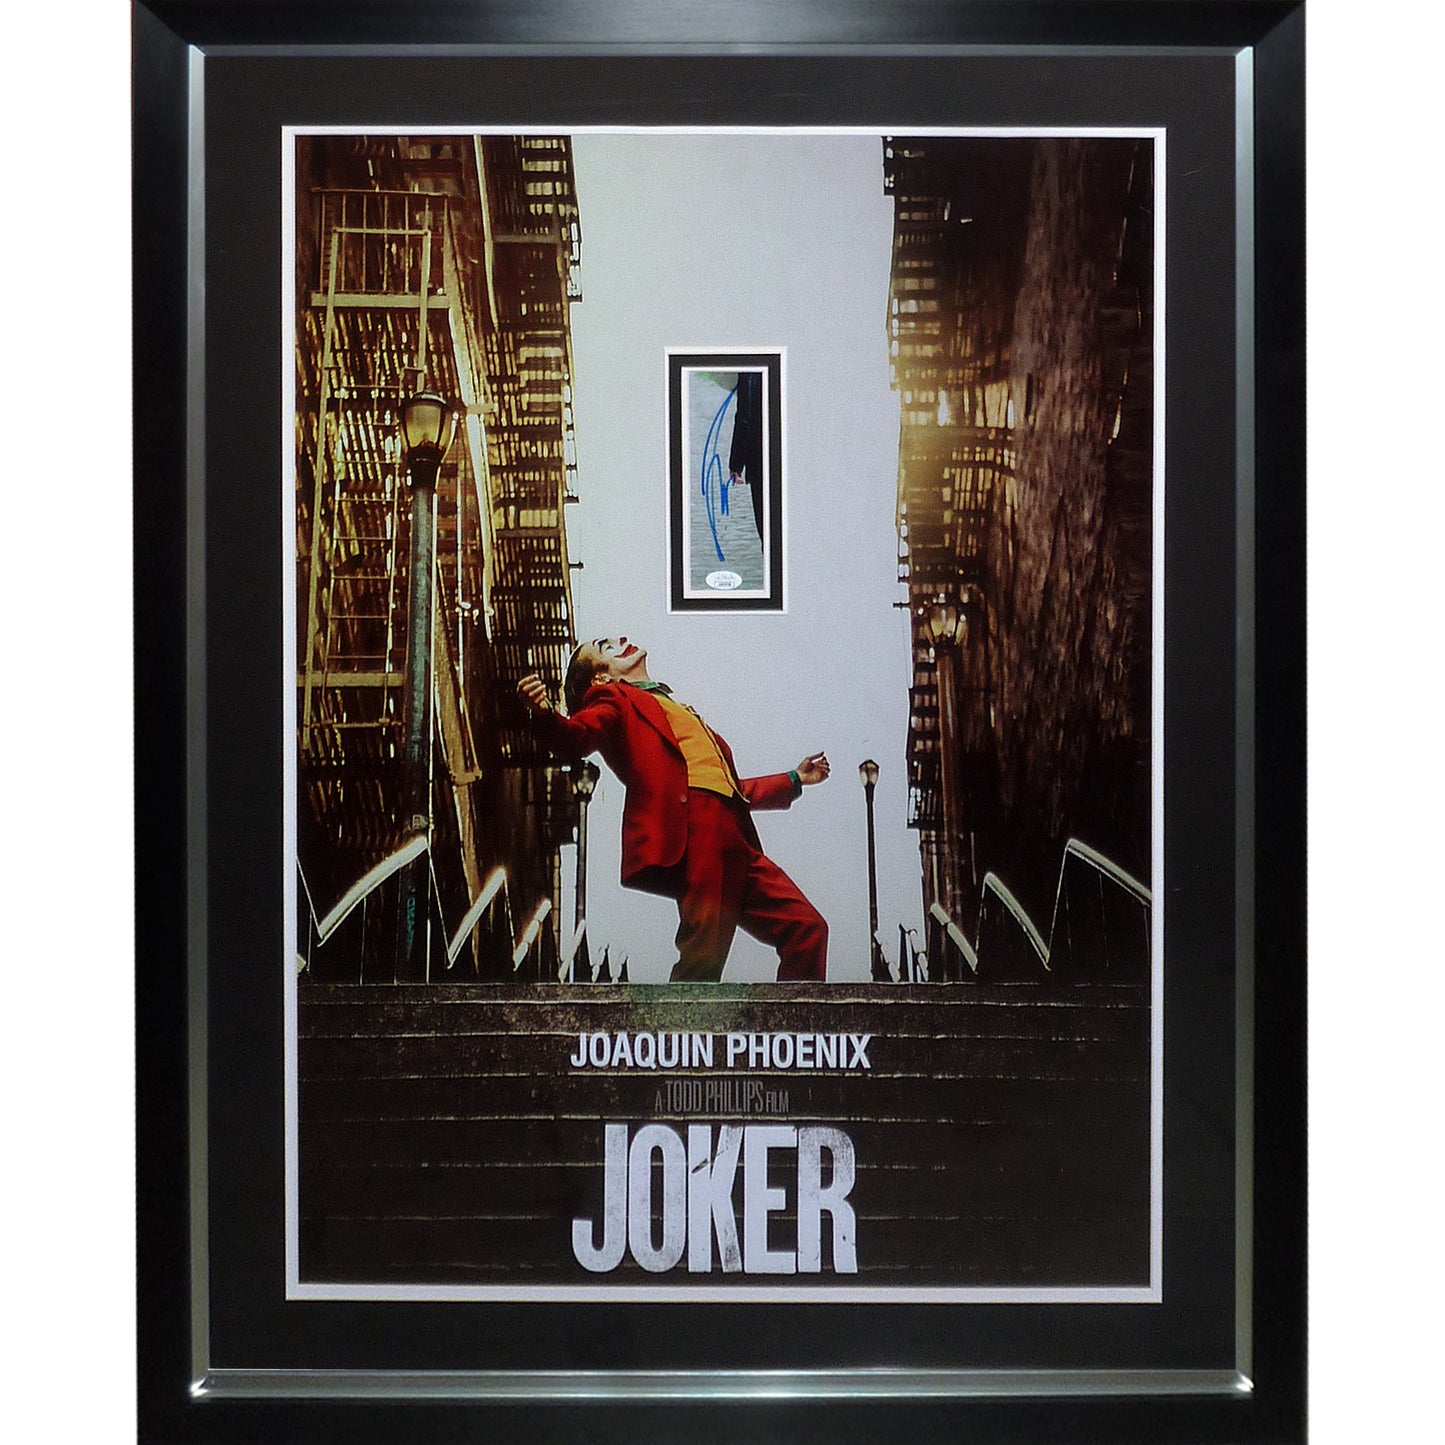 The Joker Full-Size Movie Poster Deluxe Framed with Joaquin Phoenix Autograph - JSA